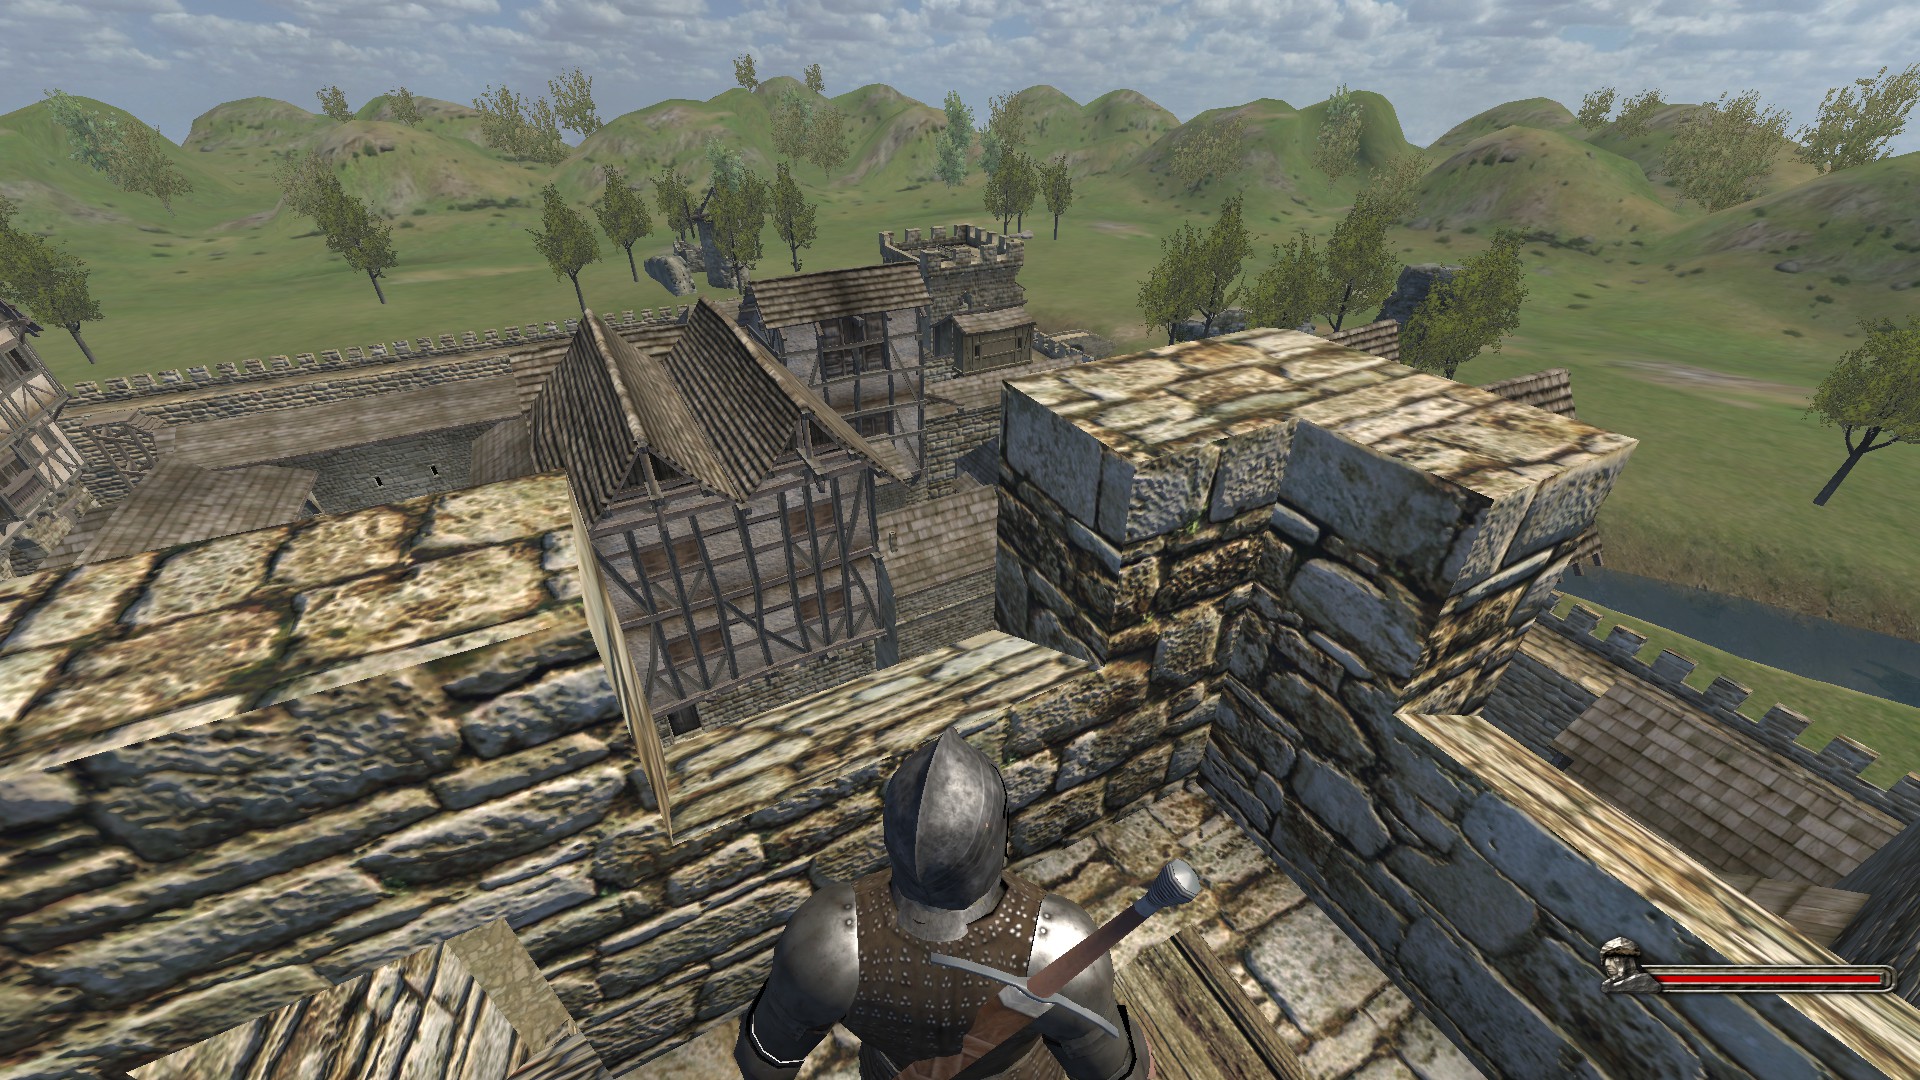 Mount blade warband города. Mount and Blade город. Mount and Blade Warband City. Warband Rust. Warband Parabellum.